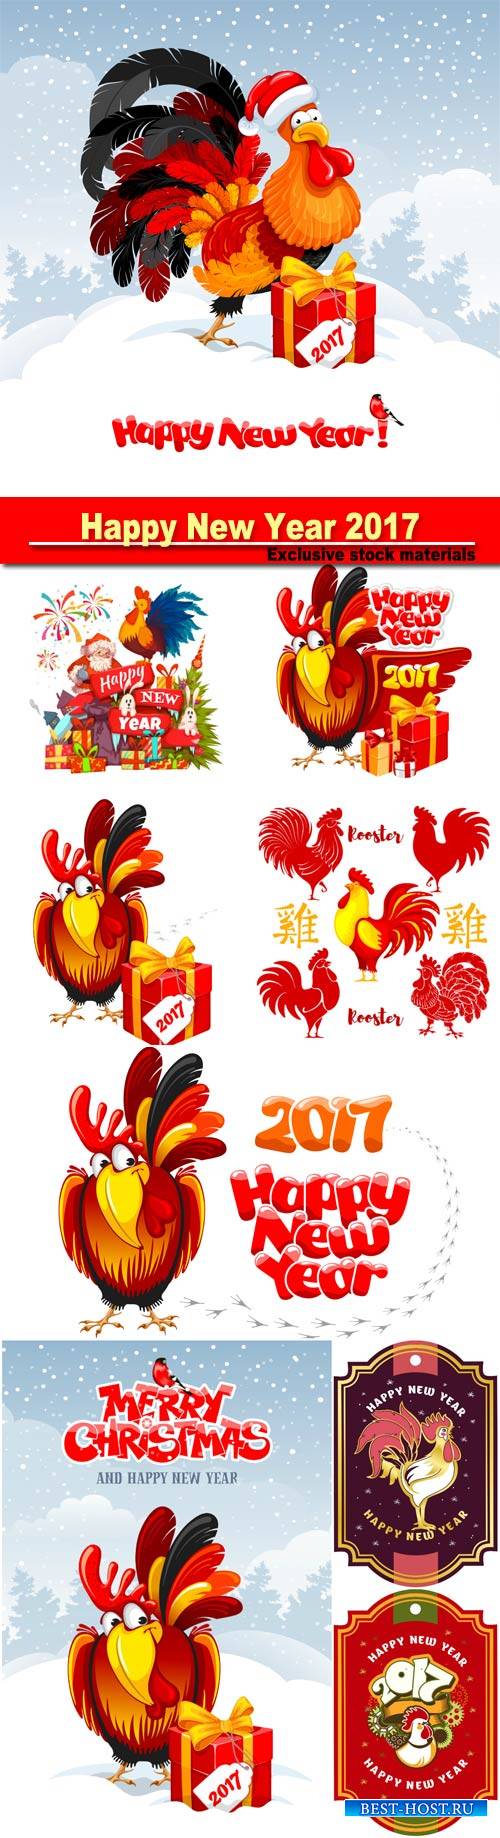 Happy New Year 2017 banner with Santa Claus and rooster on ribbon